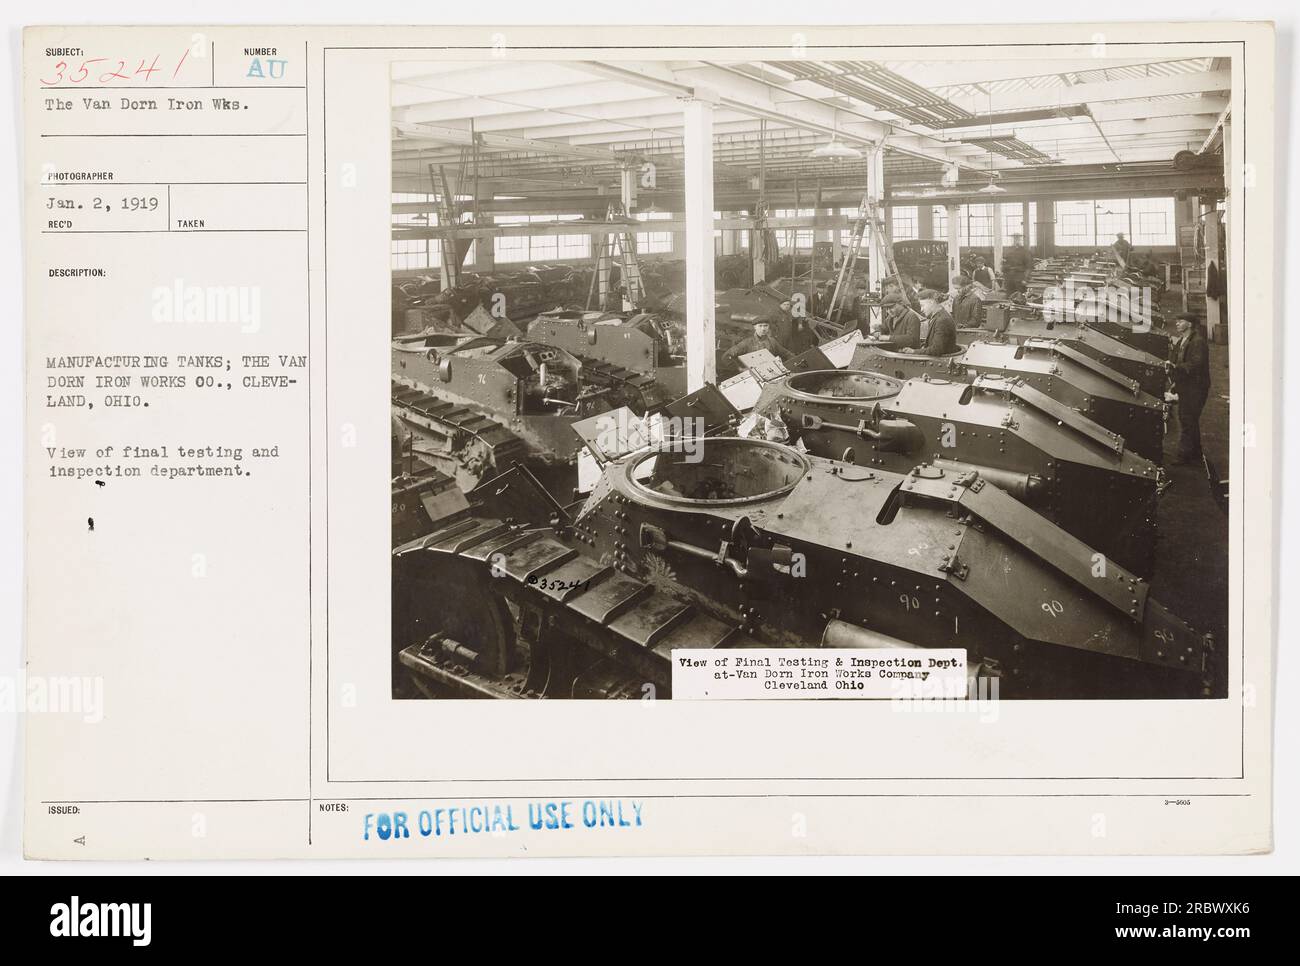 Final testing and inspection department at the Van Dorn Iron Works Company in Cleveland, Ohio, during World War One. The photo shows the manufacturing process of tanks. It was taken on January 2, 1919, by the photographer assigned with documenting American military activities. This image was classified as 'FOR OFFICIAL USE ONLY.' Stock Photo